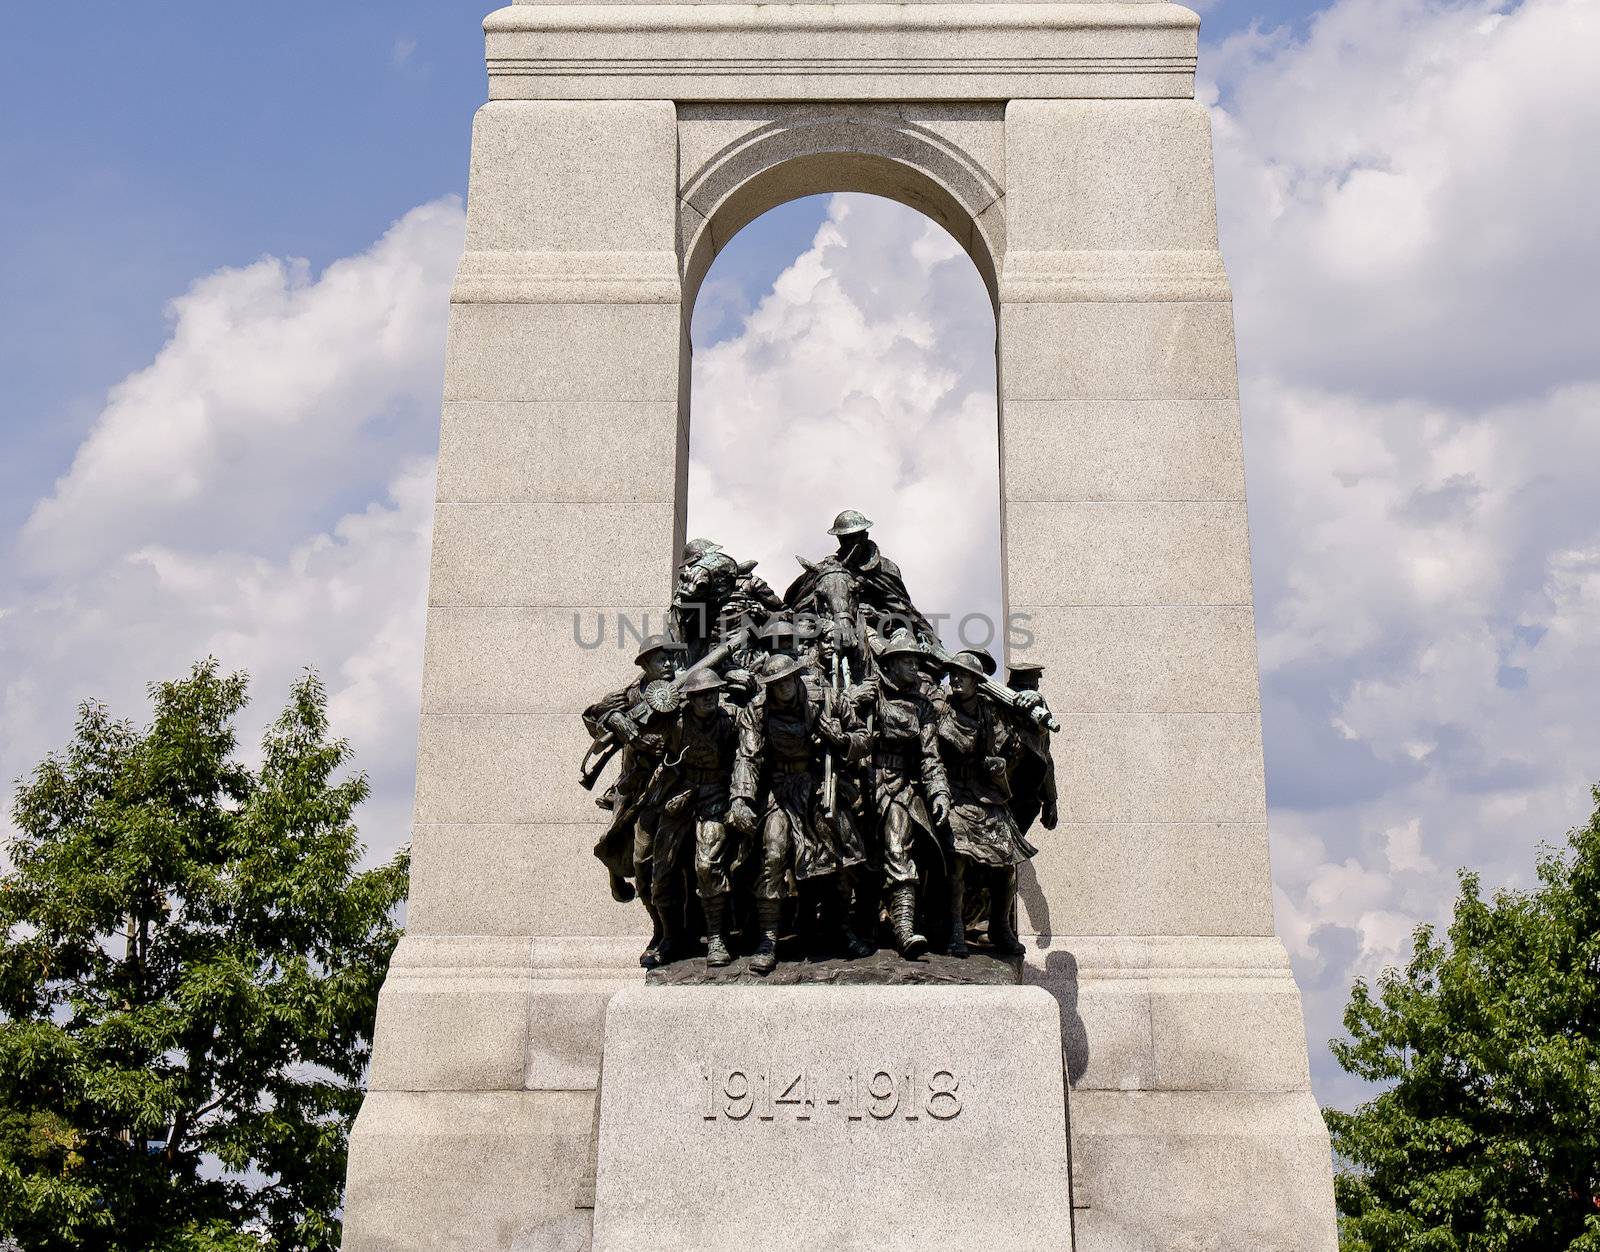 The National War Memorial stands in Confederation Square, Ottawa, Canada and serves as the federal war memorial for Canada.